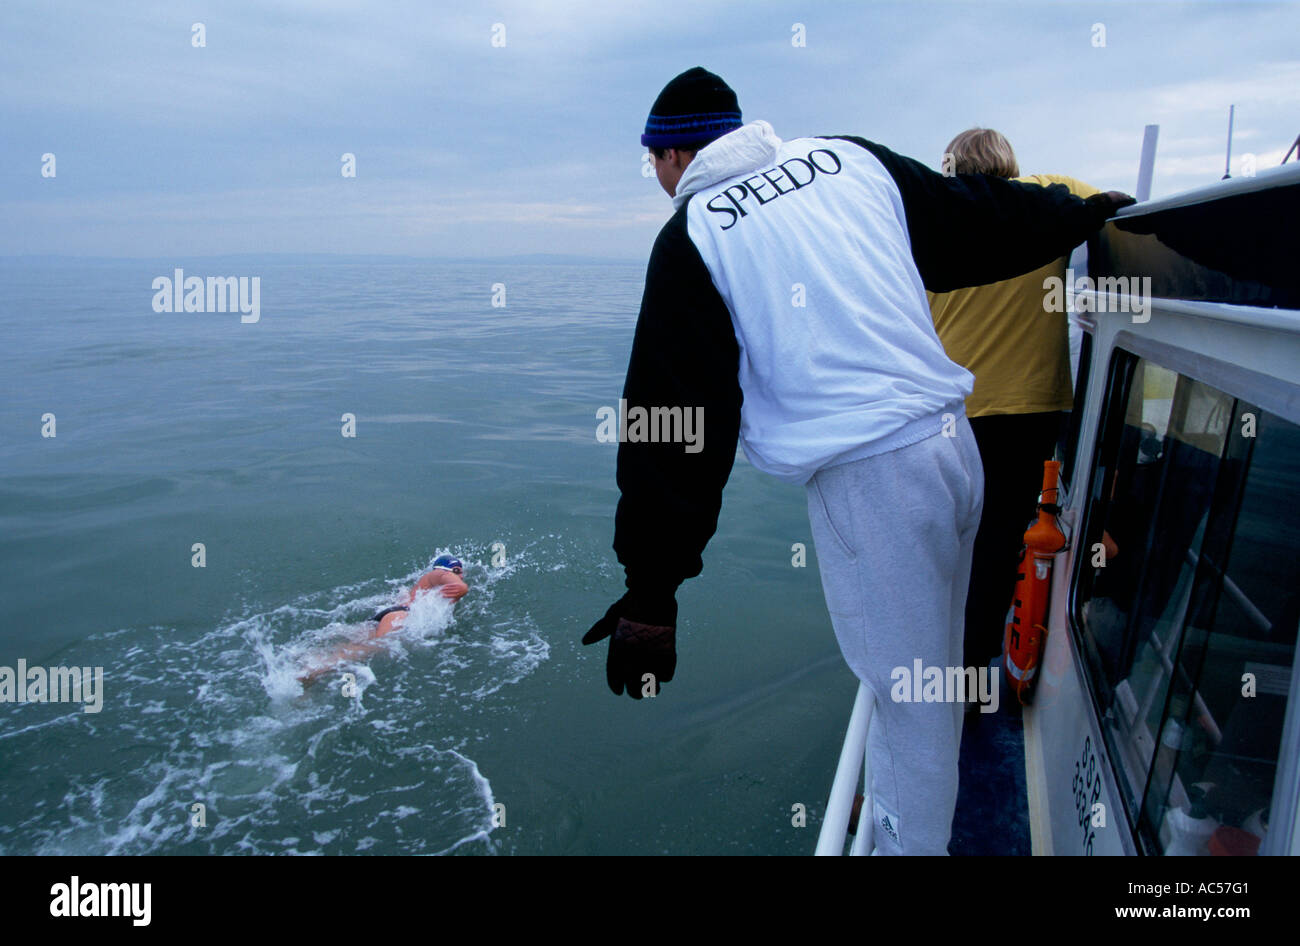 A MAN IN SPEEDO TRACKSUIT STANDS ON A BOAT EDGE WATCHING A MEMBER OF THE  BRITISH CROSS CHANNEL RELAY SWIMMING TEAM IN THE WATER Stock Photo - Alamy